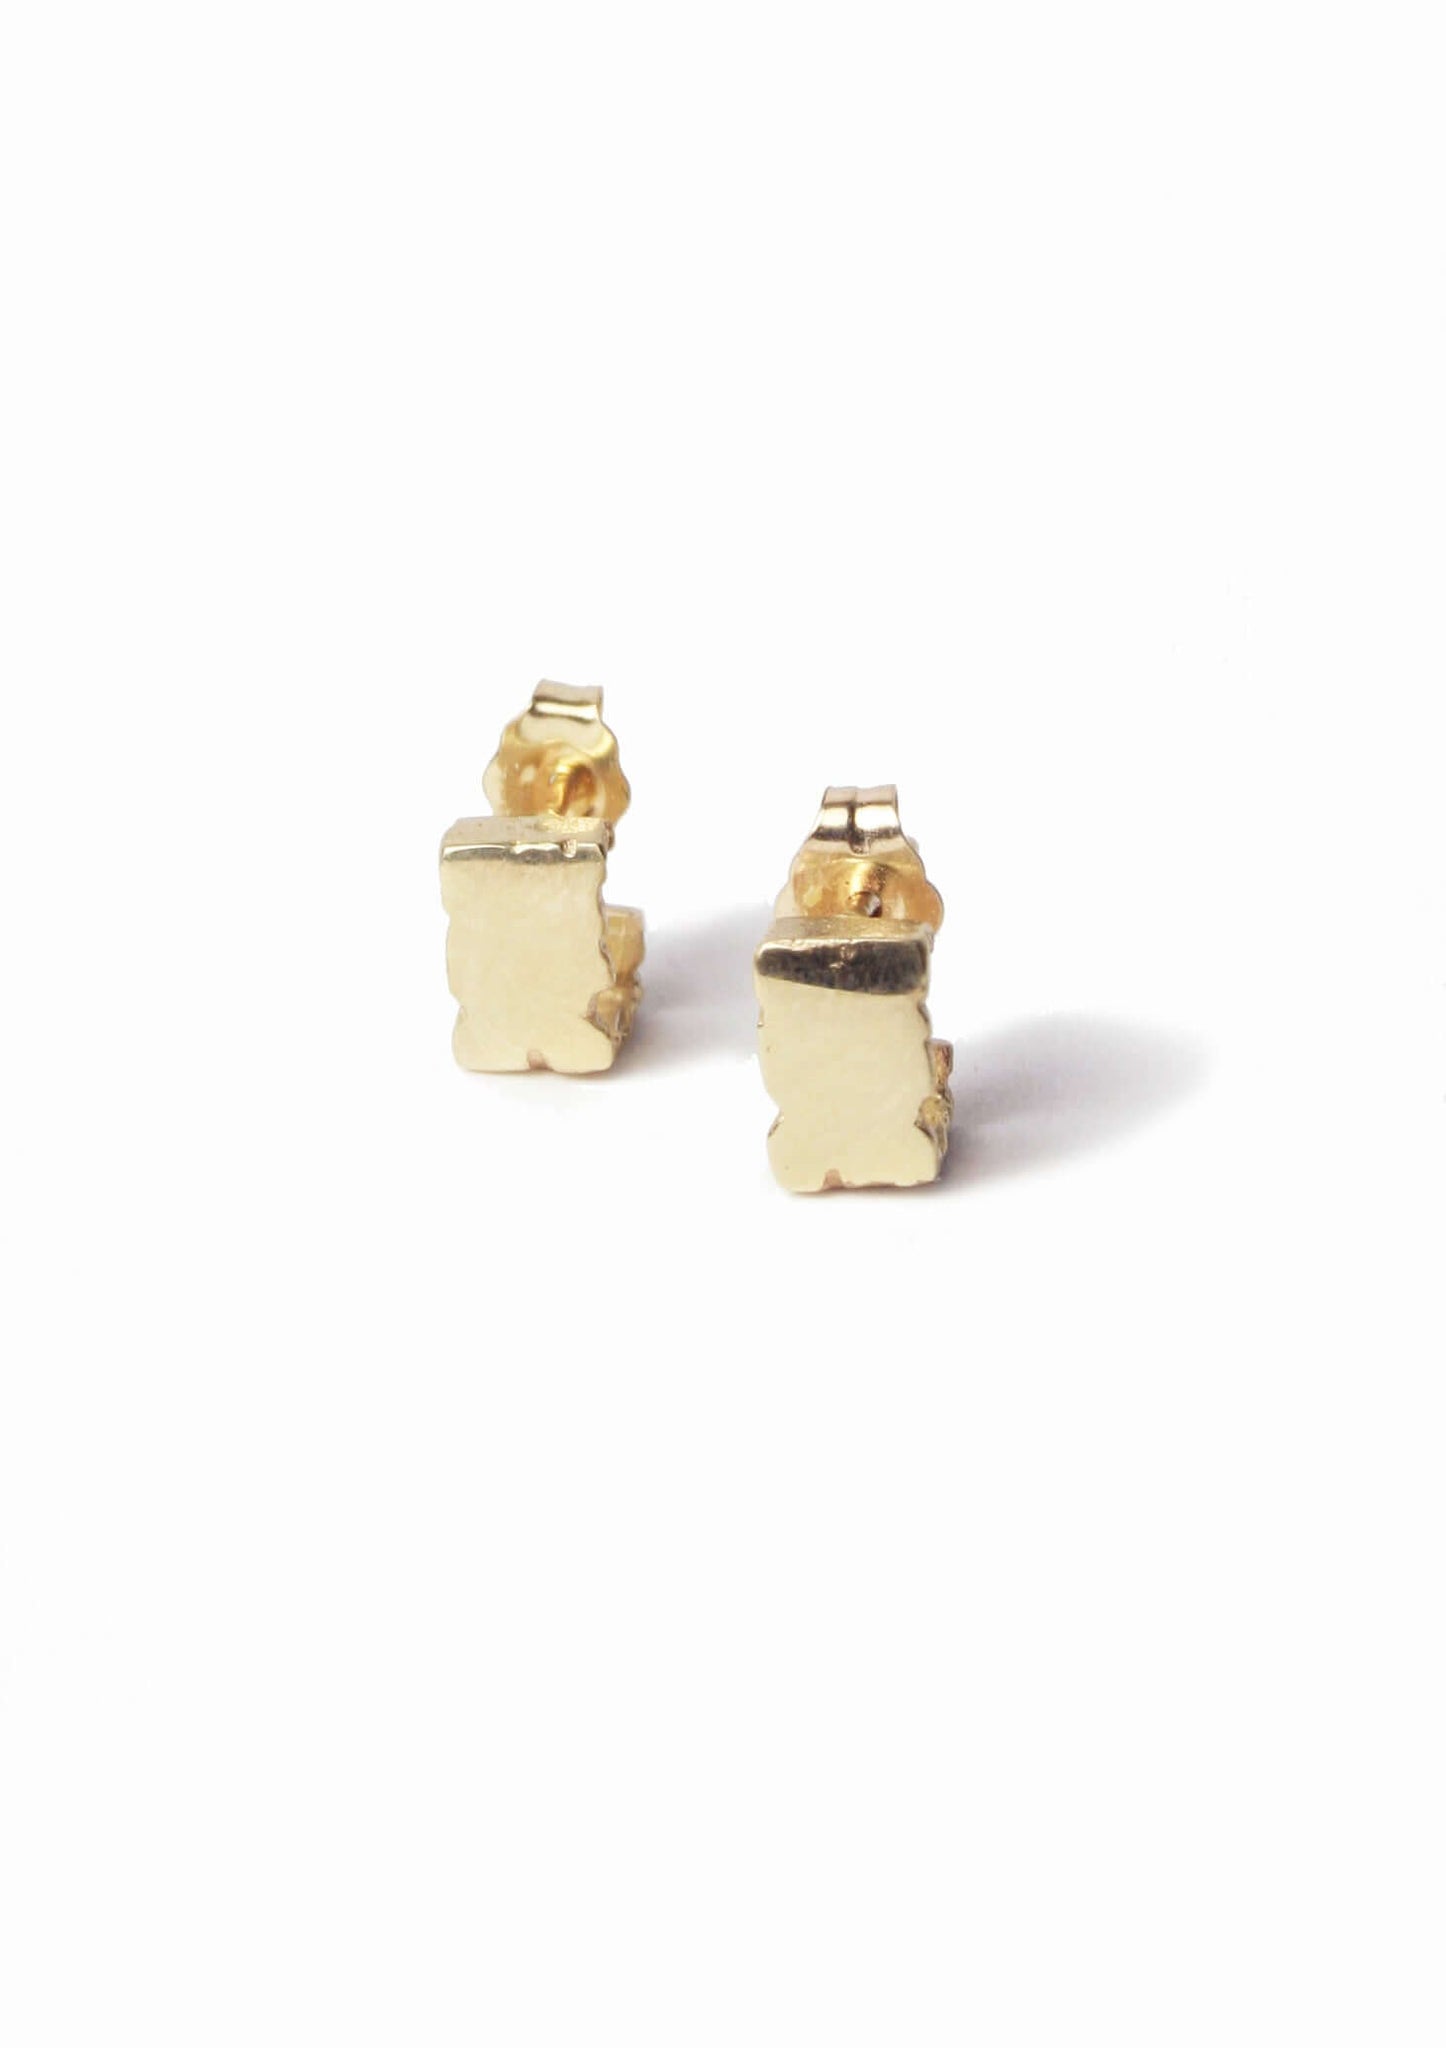 Solid Gold Textured Handcrafted Earrings